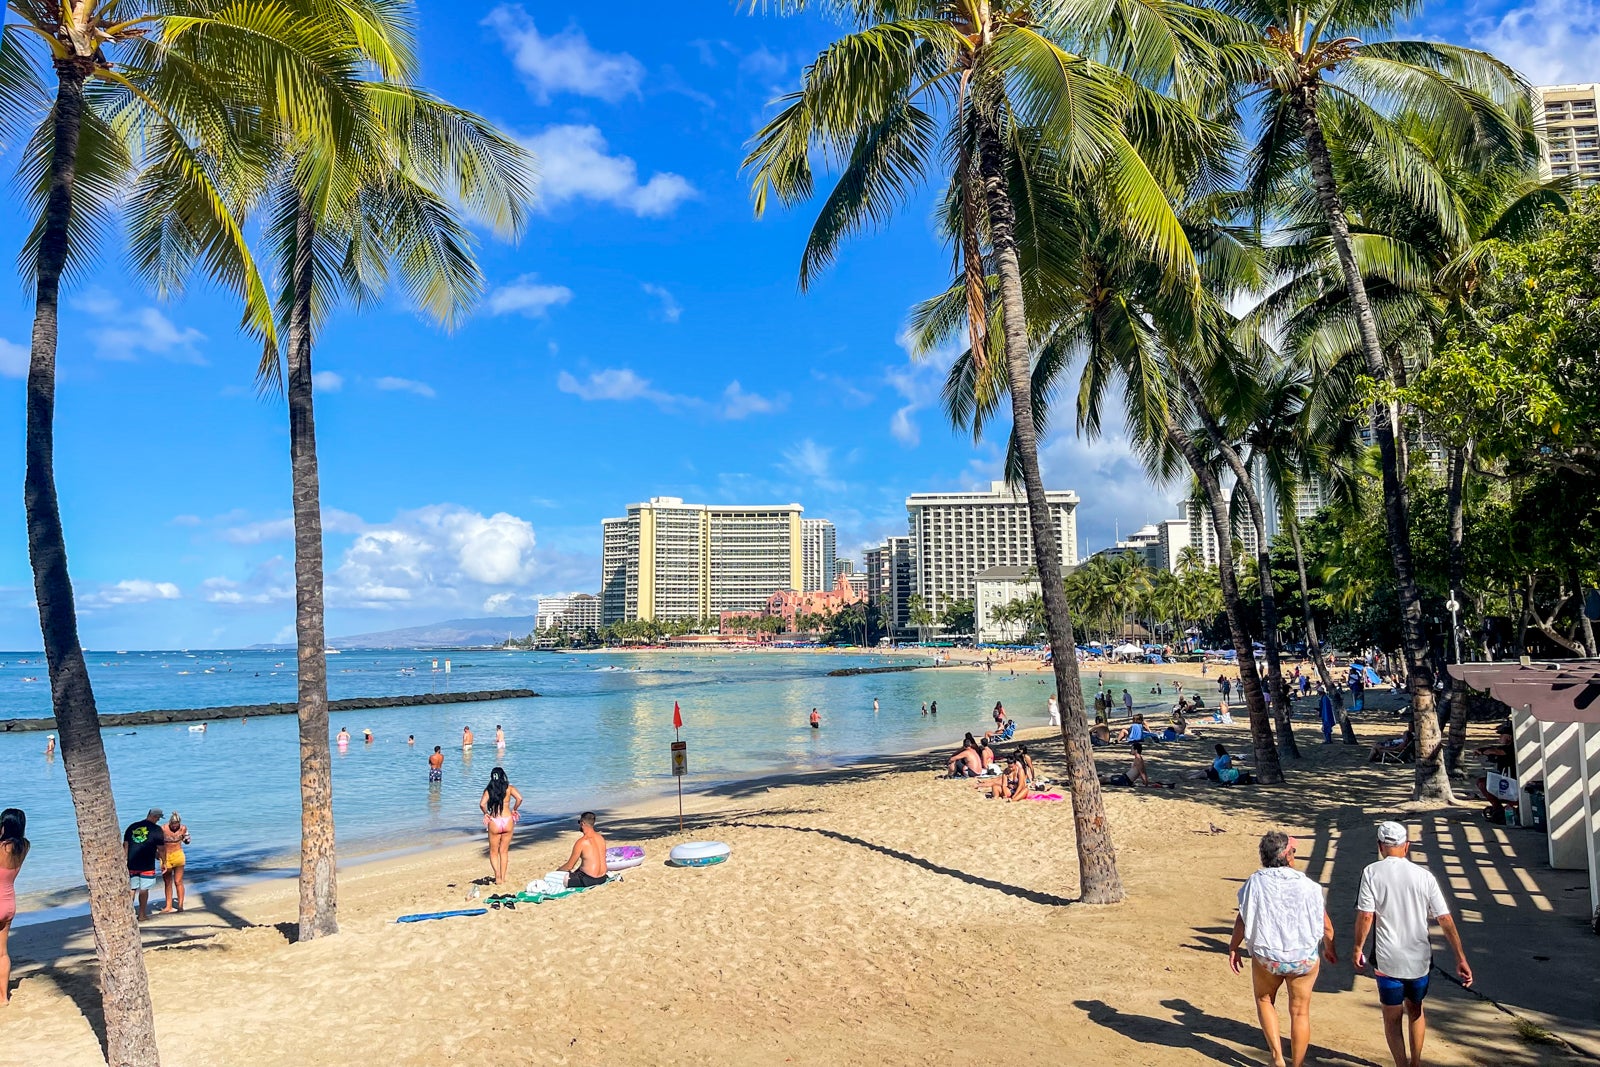 Act fast: Alaska Airlines is selling one-way fares to Hawaii for as low as $99